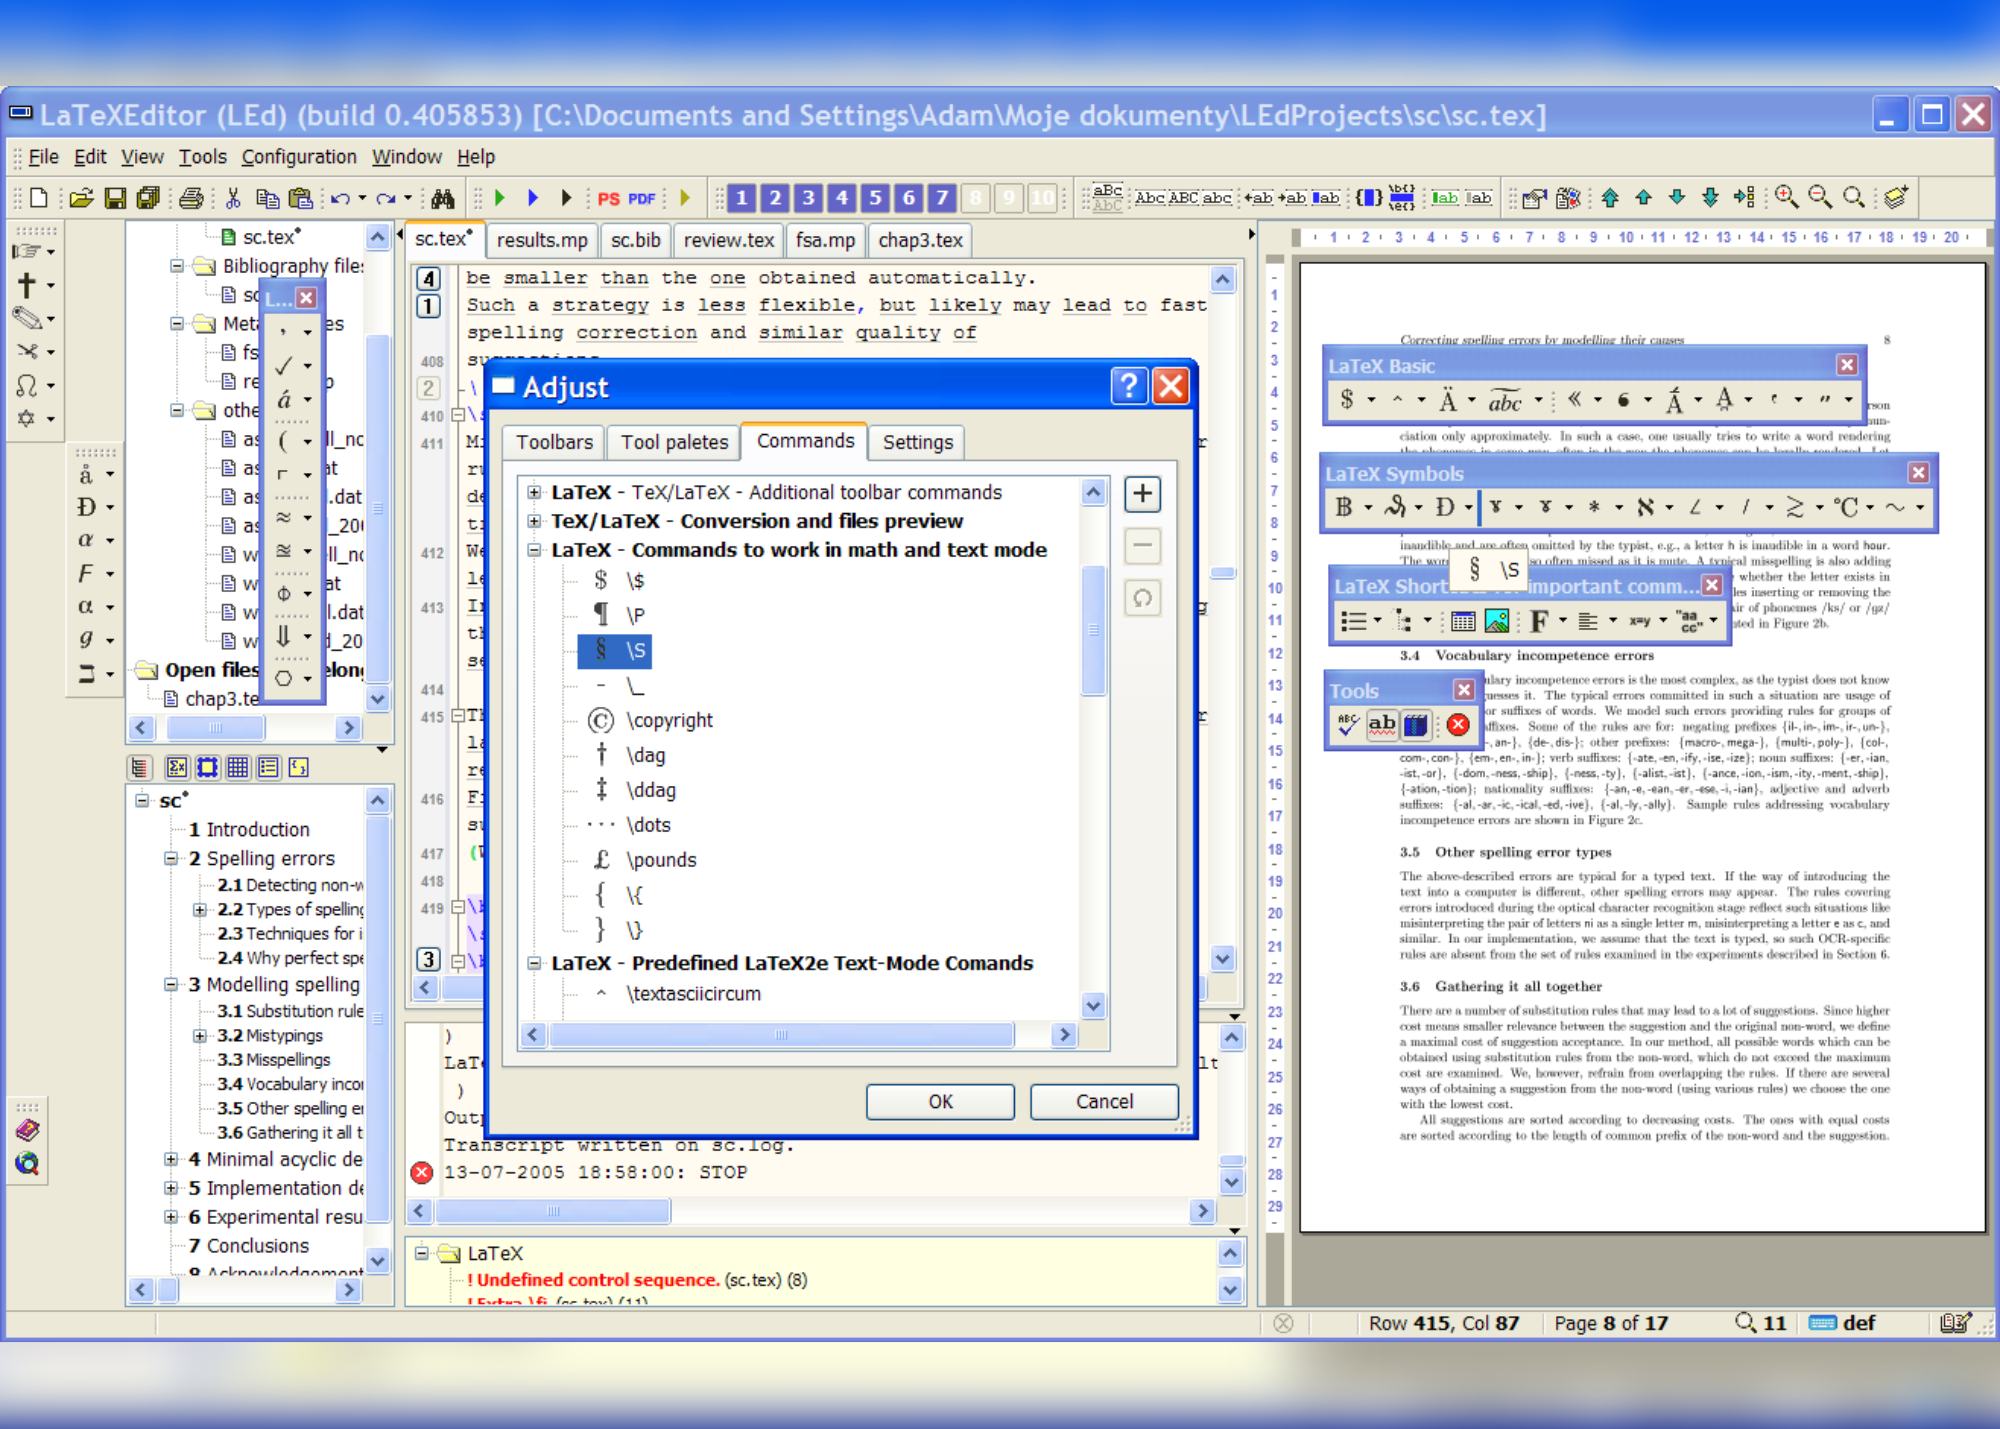 Screenshot of LaTex toolbars, a draft document, and a LaTex command feature